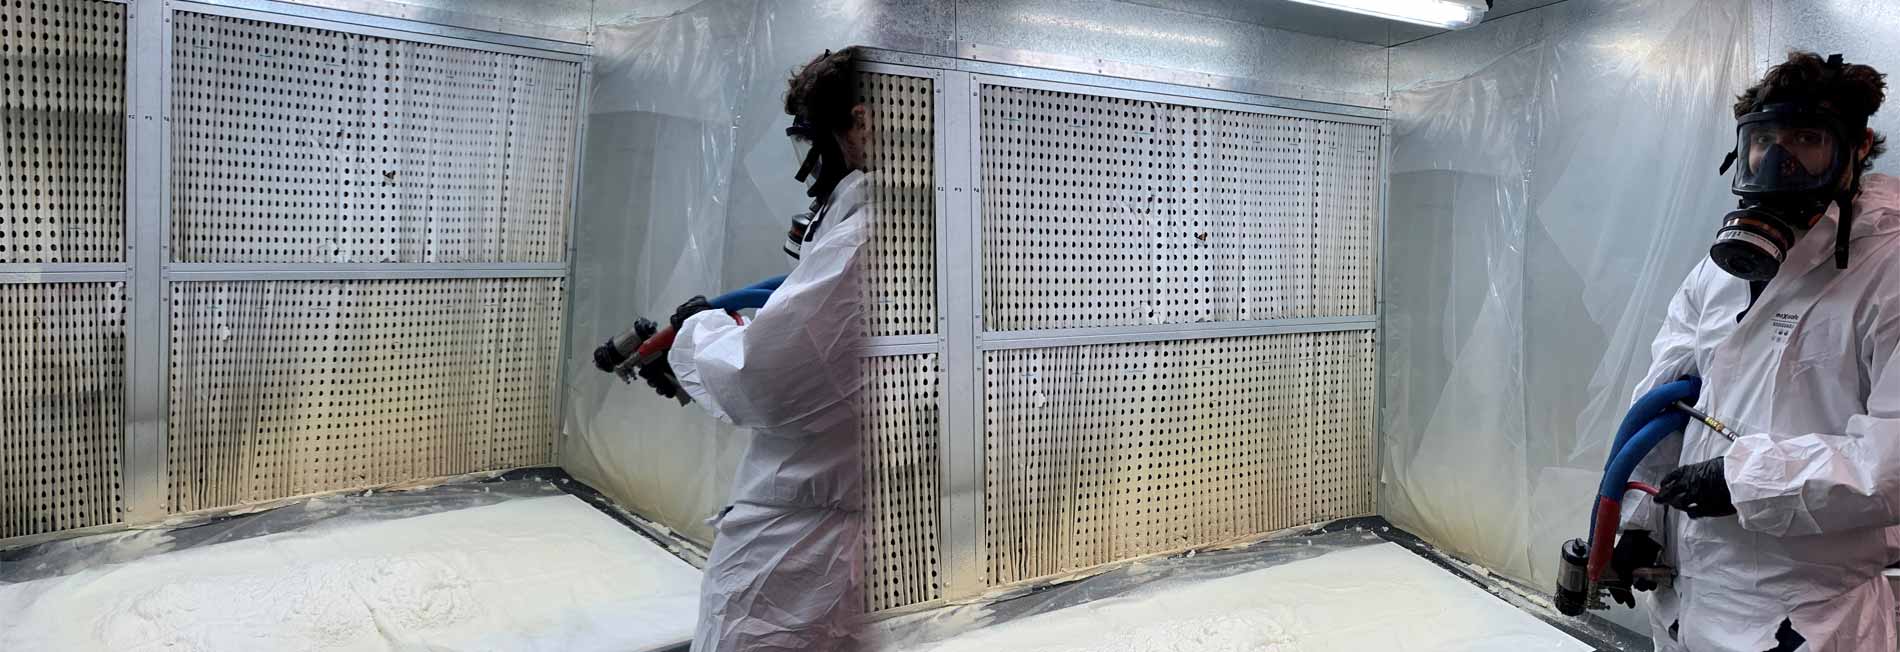 Pacific Urethanes R&D Centre has installed an industrial Spray Booth